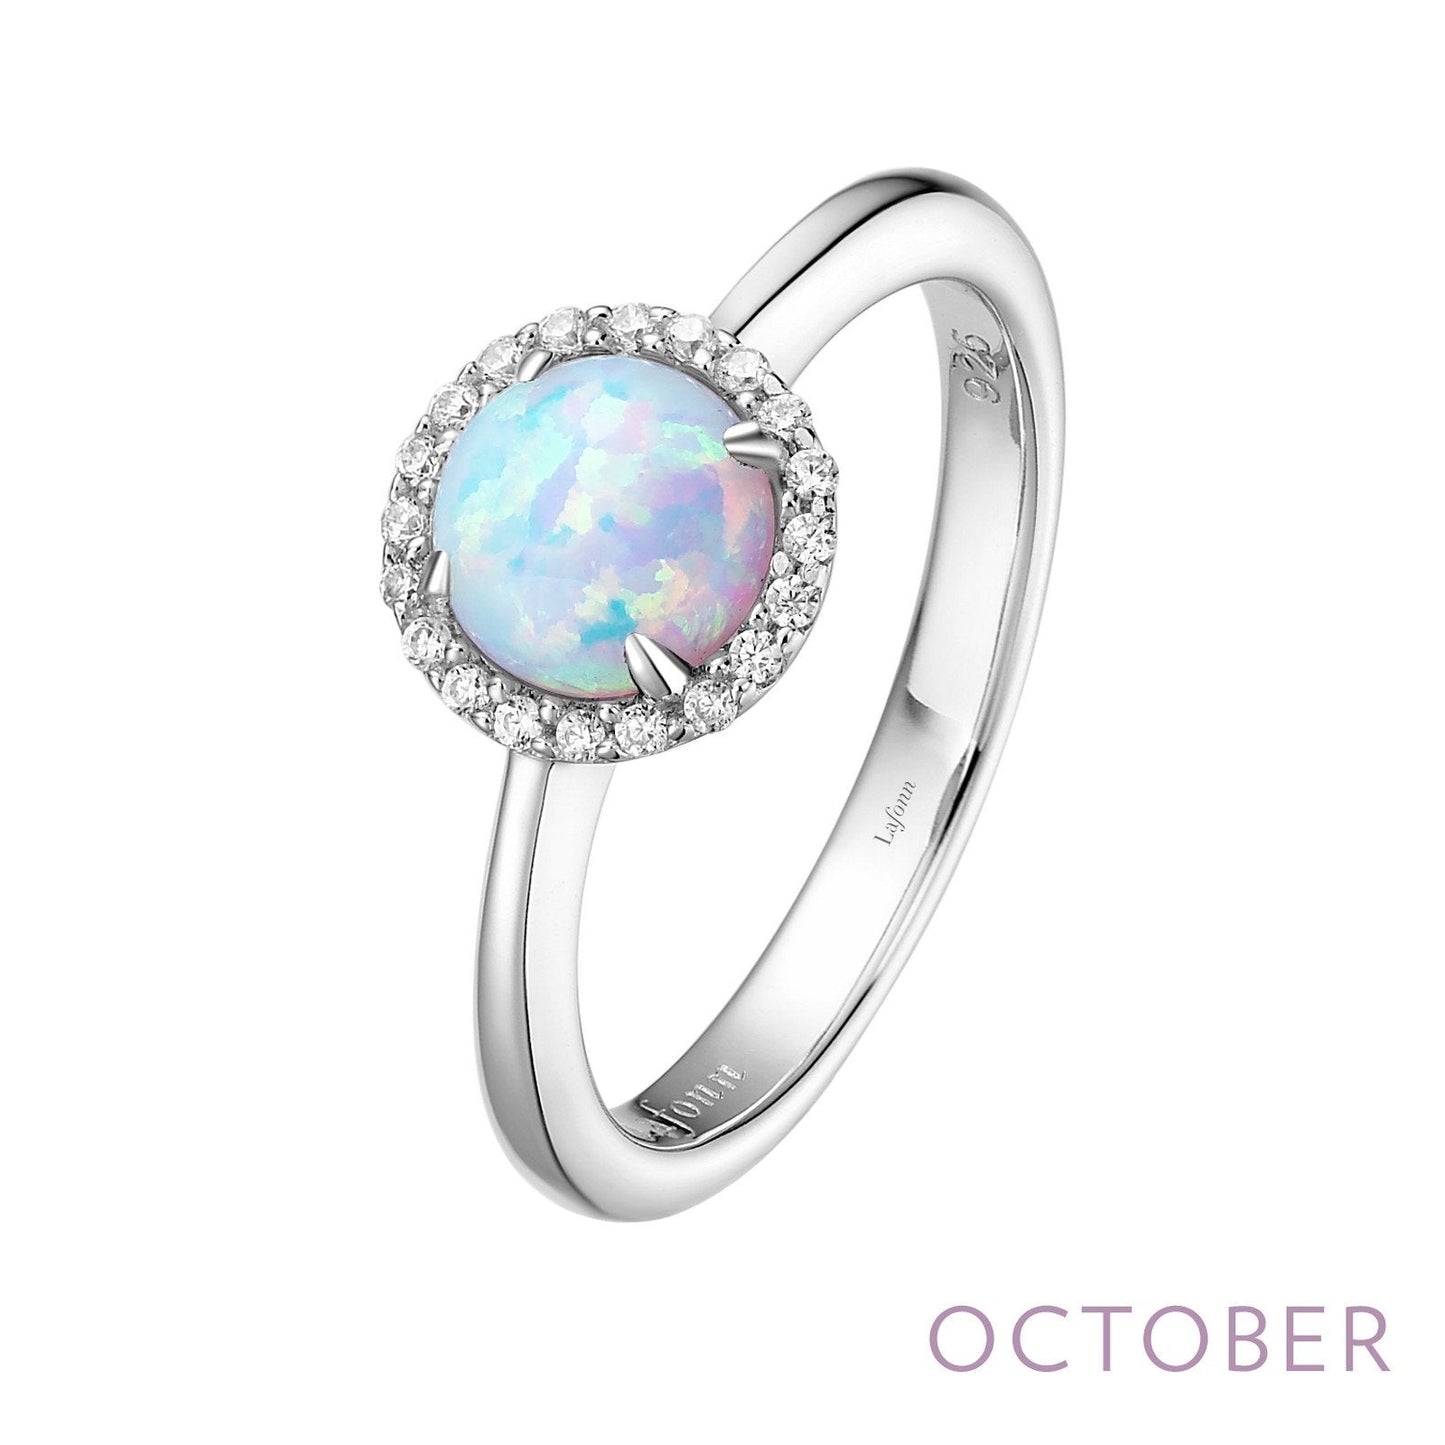 Lafonn October Birthstone Ring OCTOBER RINGS Size 10 Platinum Simulated Opal: RD 6mm.   Lassaire simulated diamonds: 0.20 cts. CTS 